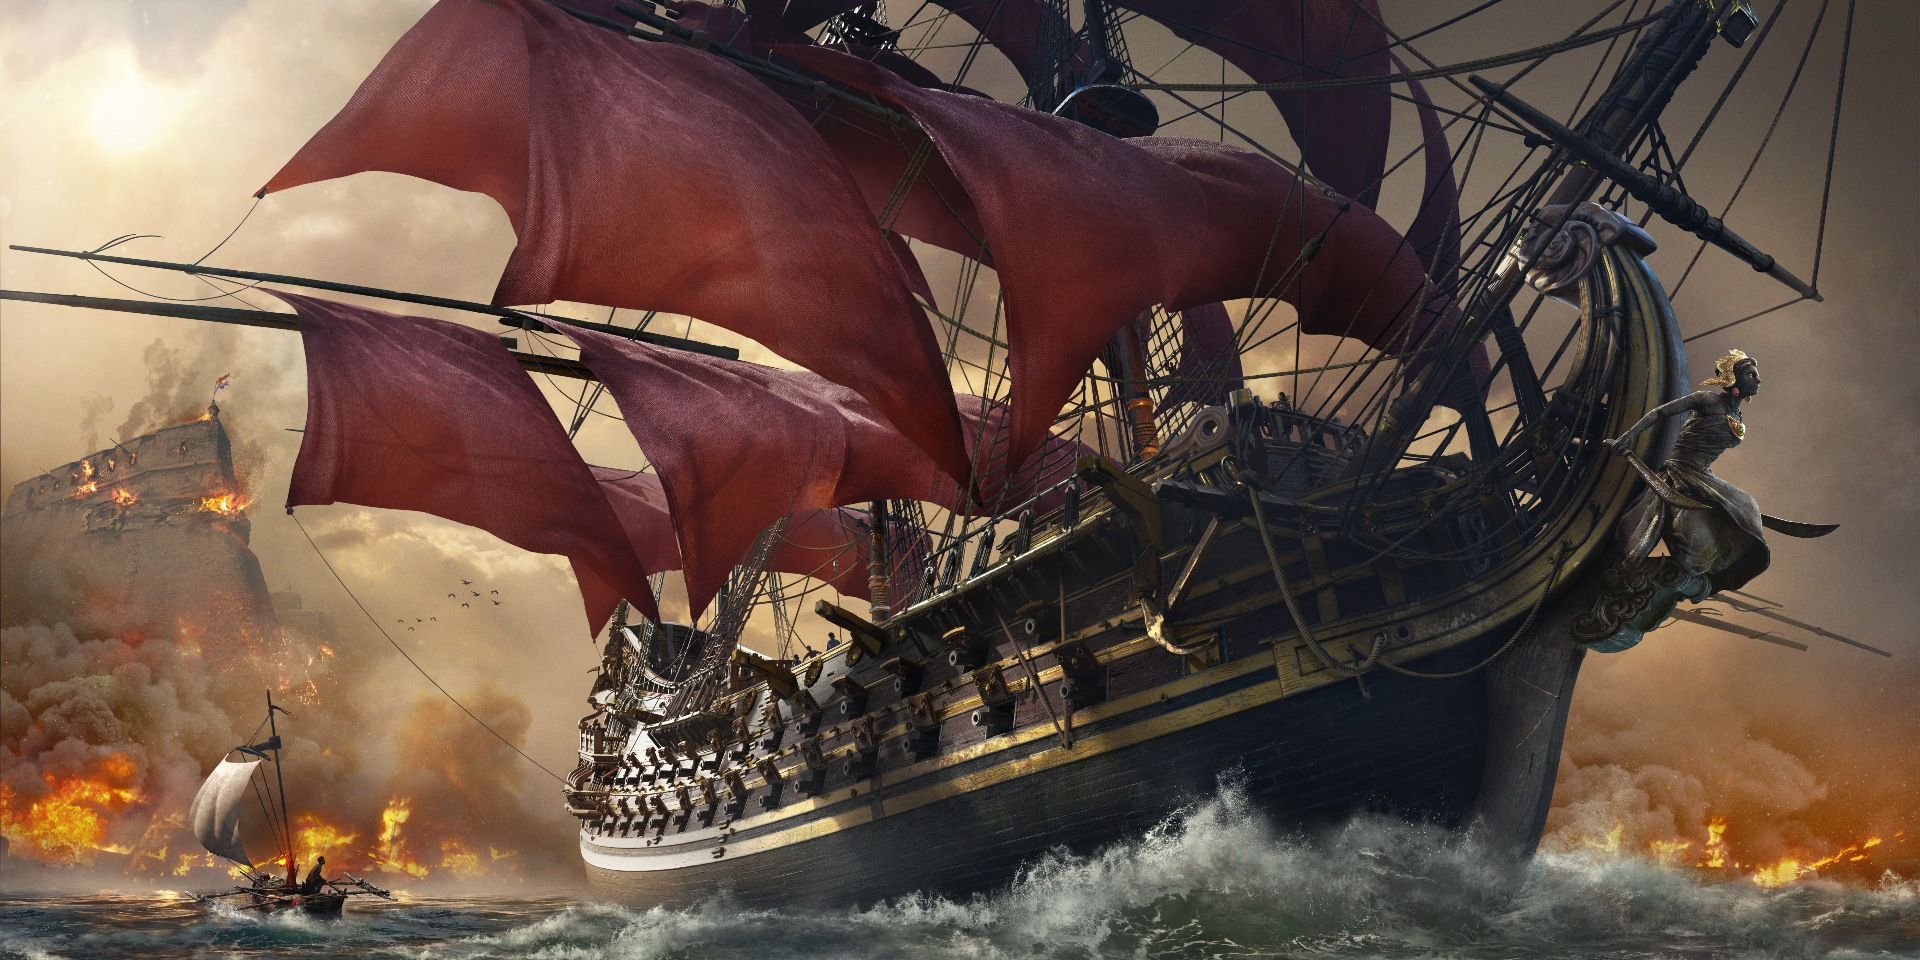 Skull & Bones Finally Sets Sail With 2022 Release Date, New Gameplay